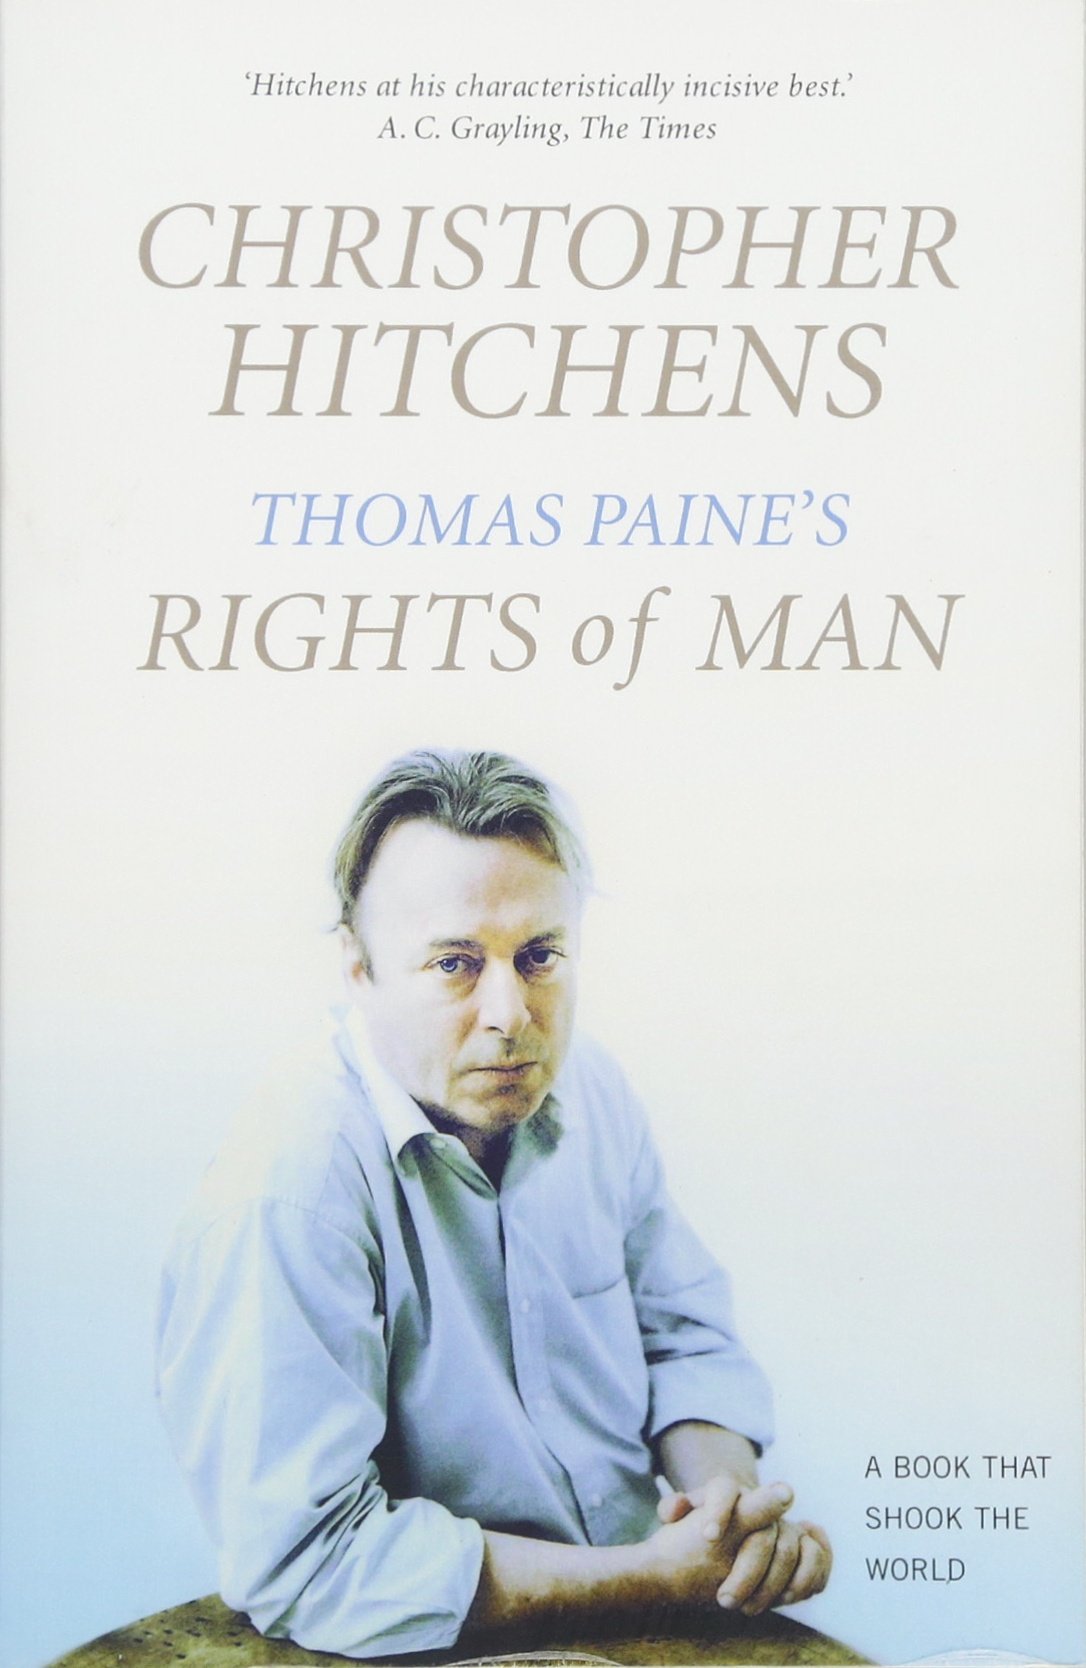 Thomas Paine's Rights of man